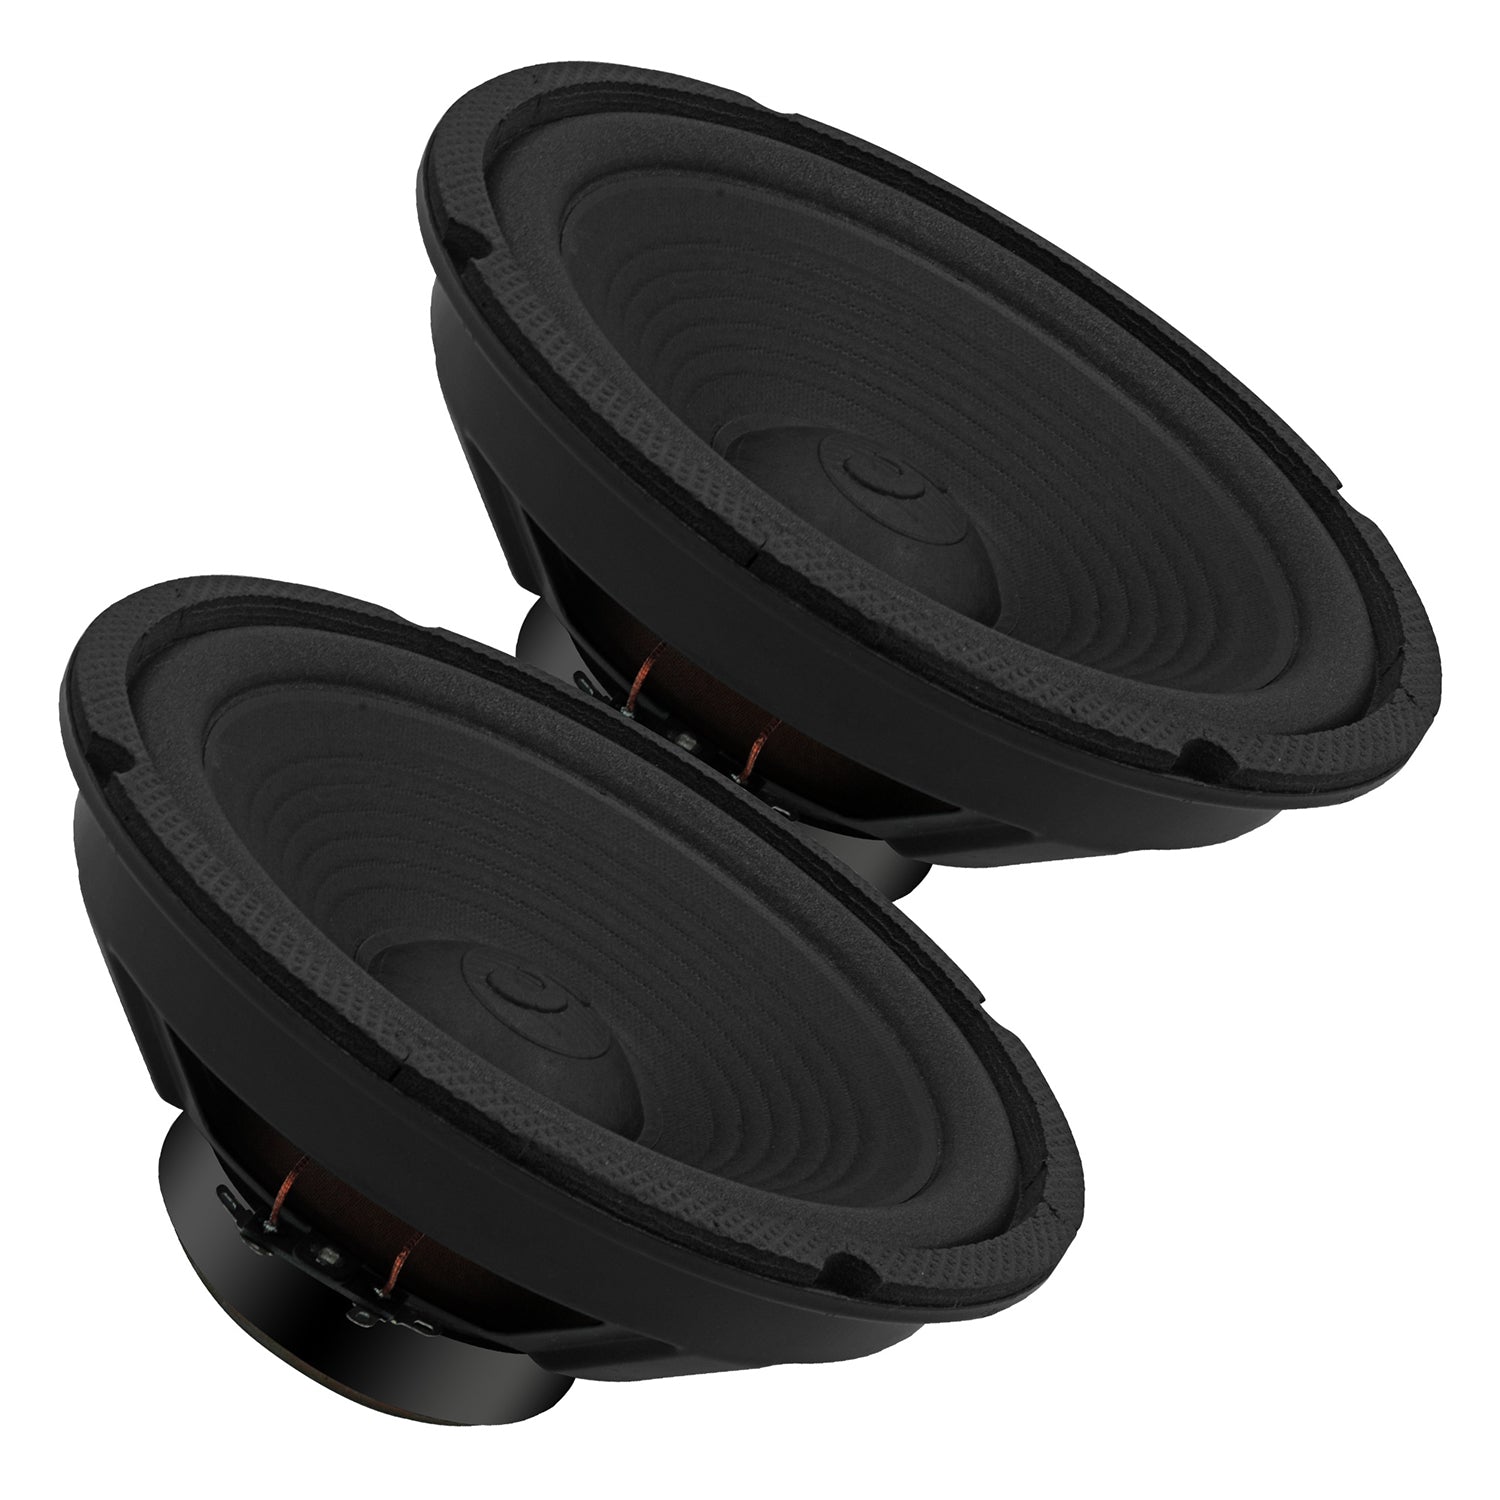 5 Core 8 Inch Subwoofer 2Pack 500W PMPO 4 Ohm Replacement Car Bass Sub Woofer w 0.81" Voice Coil